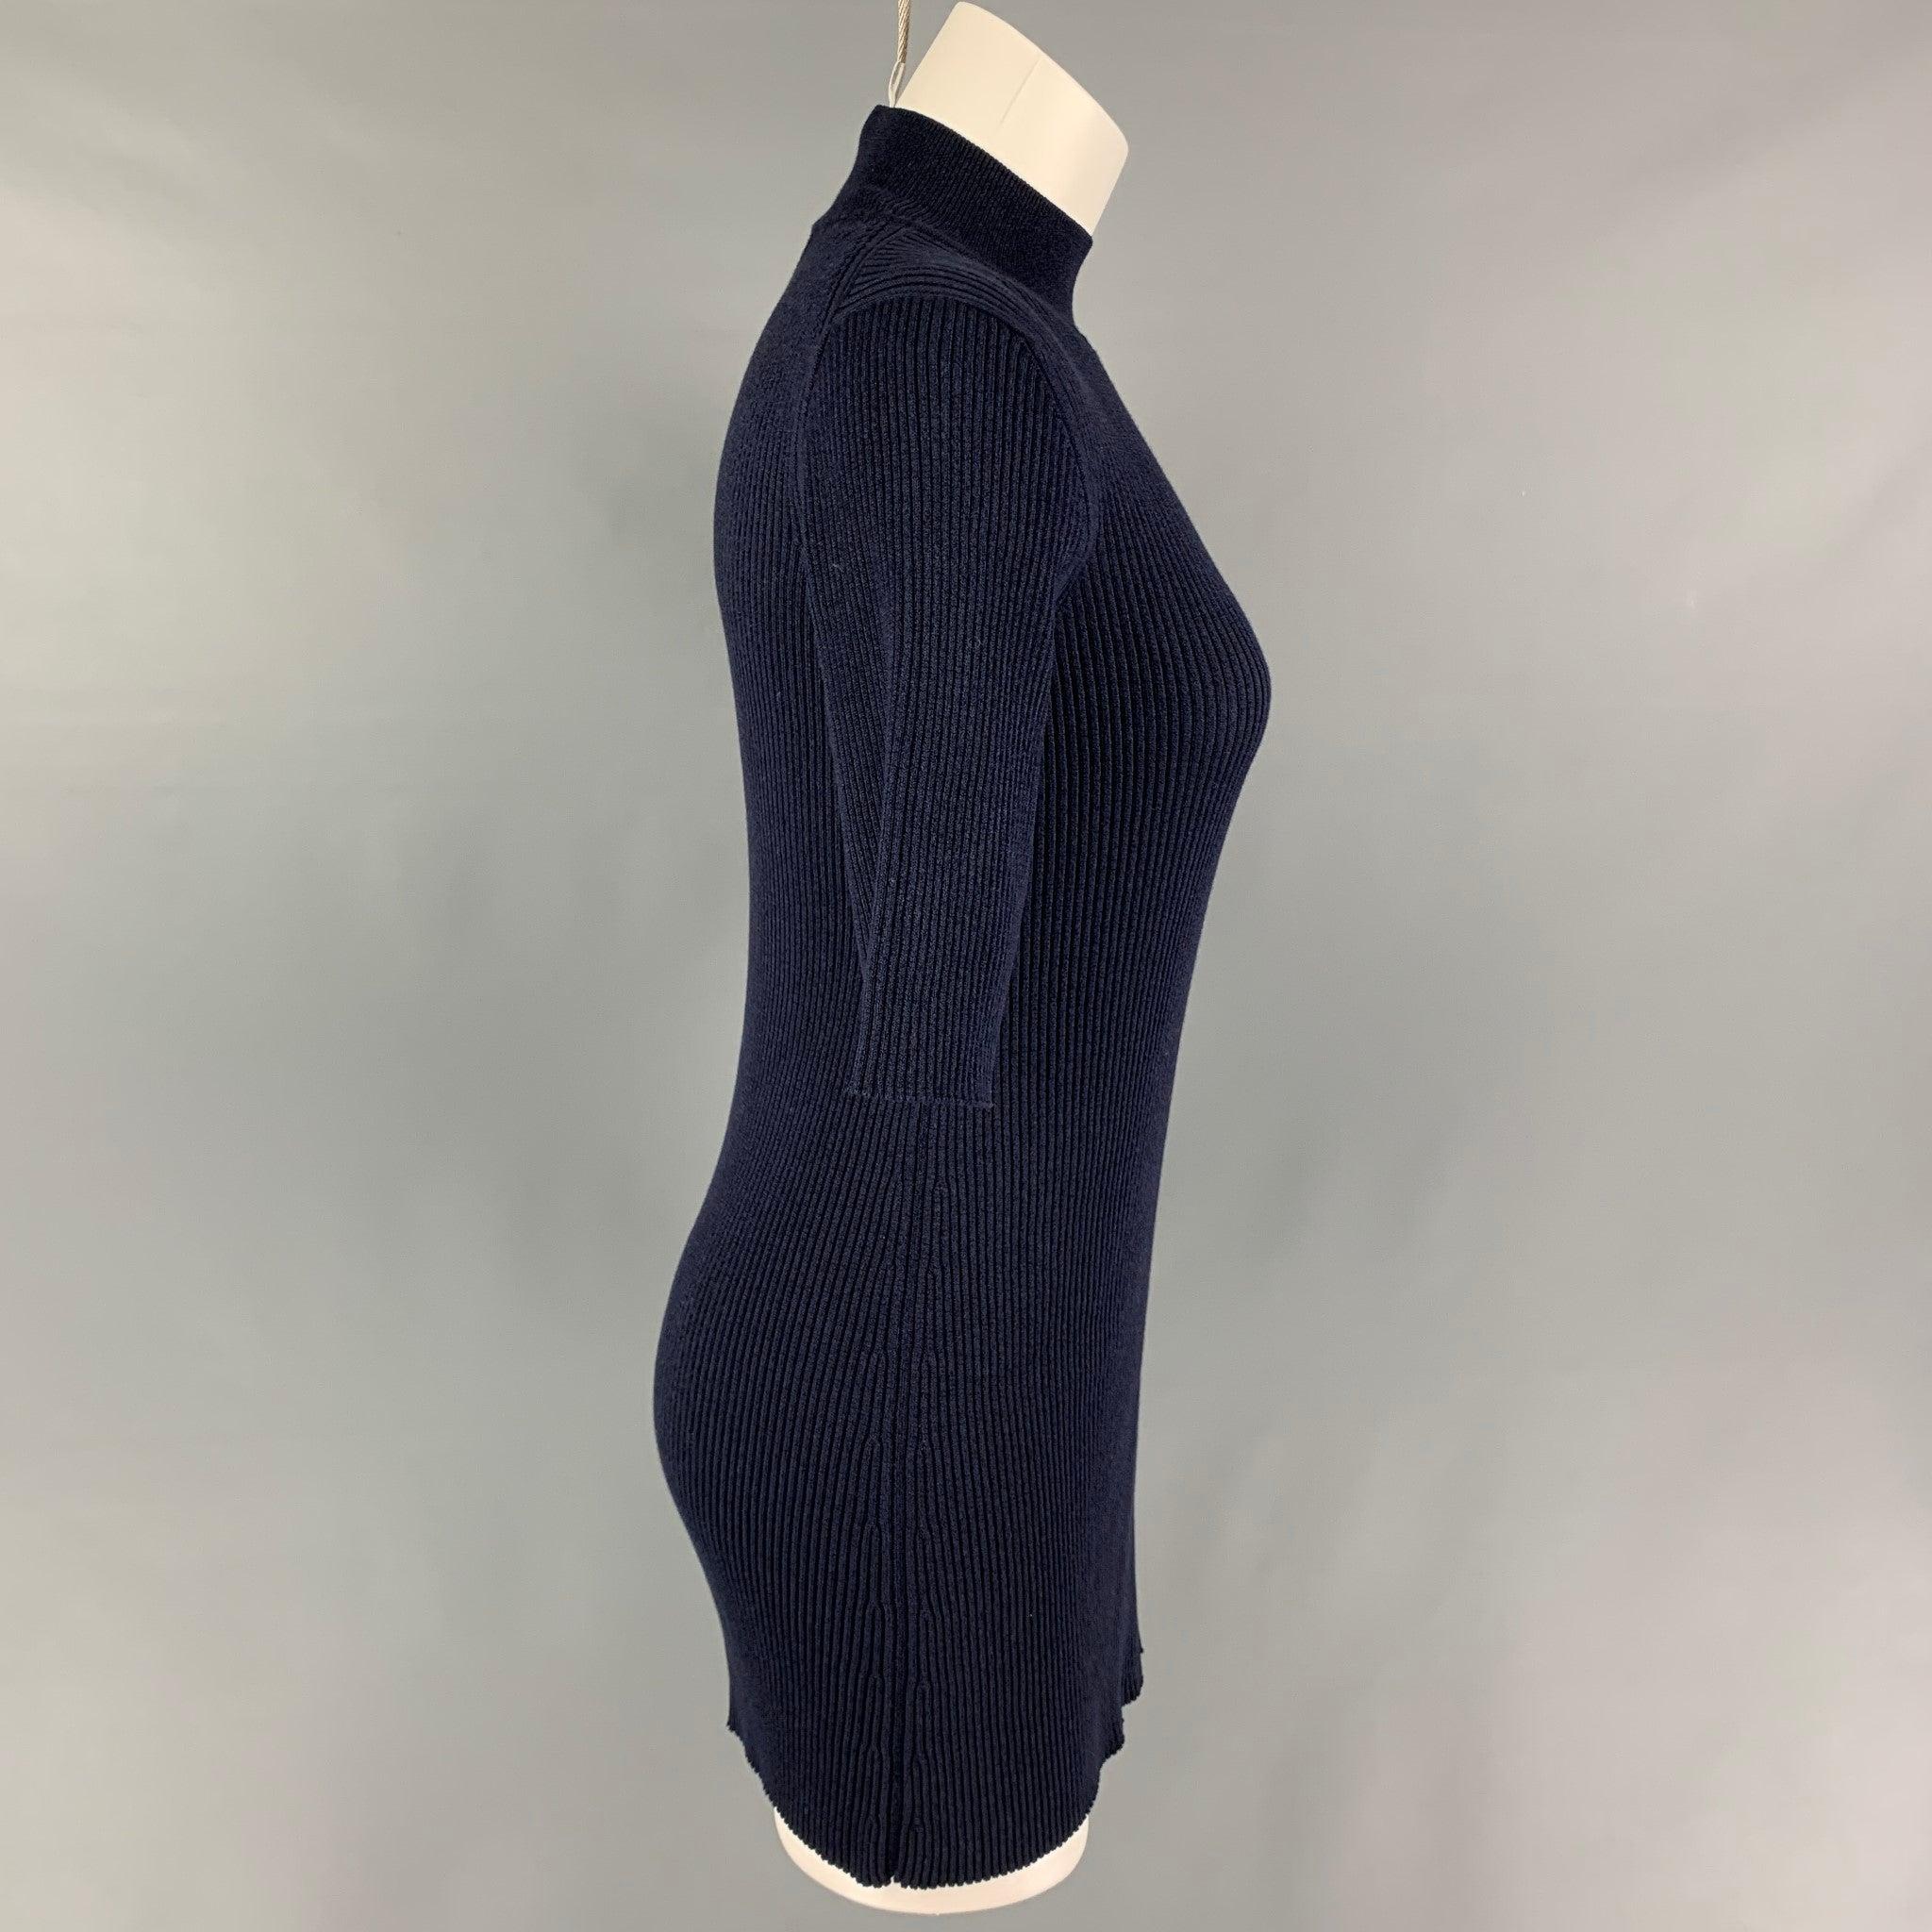 THE ROW 'Cassiopea' top comes in a navy ribbed silk / cotton featuring short sleeves and a mock neckline. Matching pants sold separately.
Very Good
Pre-Owned Condition. 

Marked:   S 

Measurements: 
 
Shoulder: 15 inches  Bust: 27 inches  Sleeve: